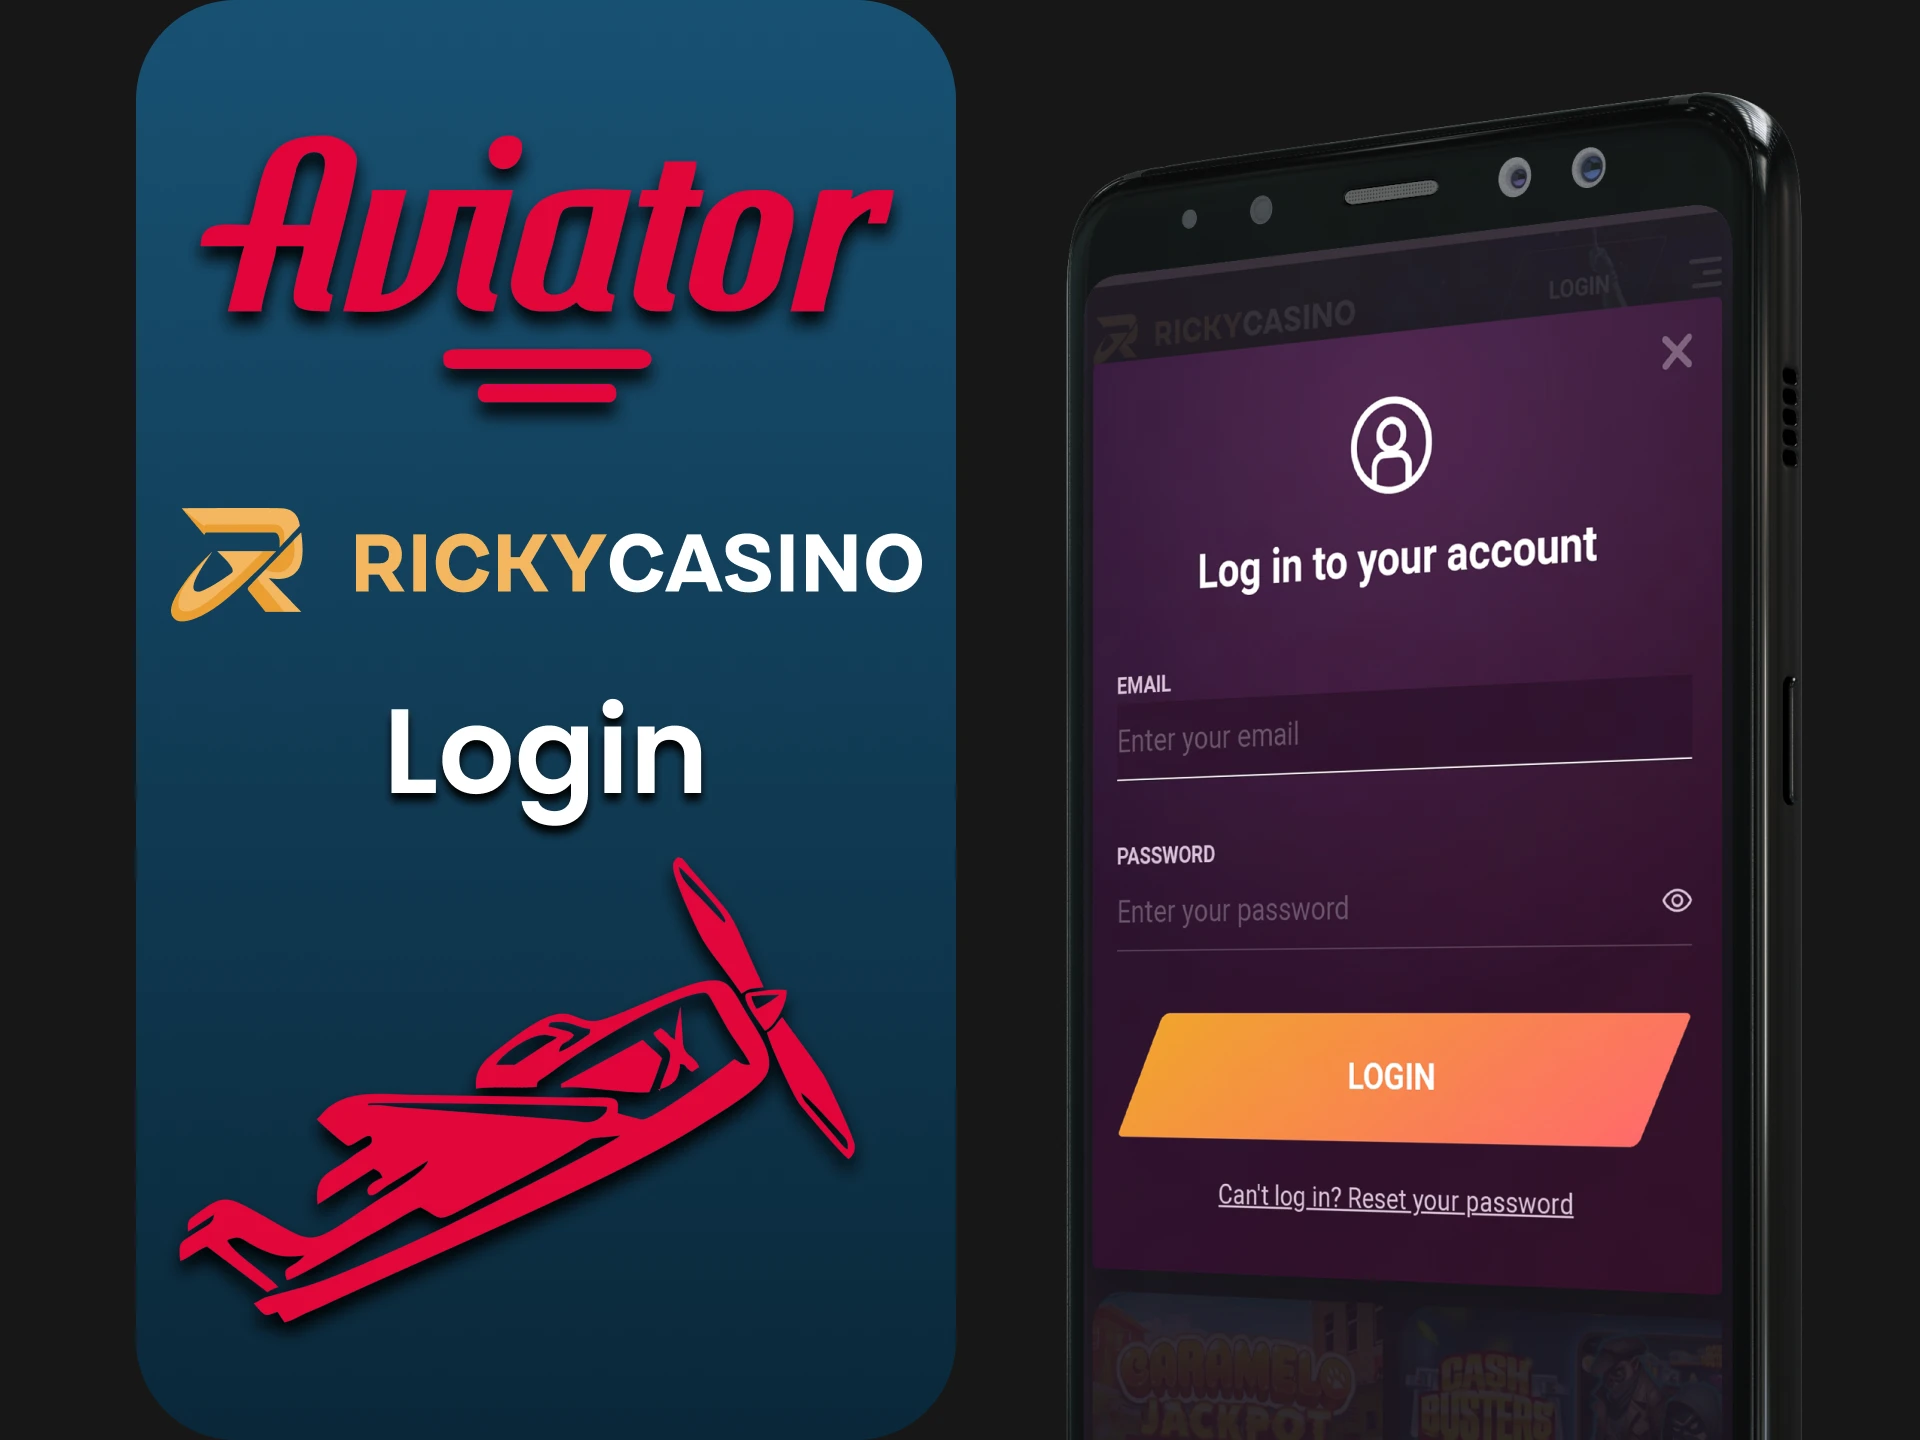 By logging into your Ricky Casino app account, you can play Aviator.